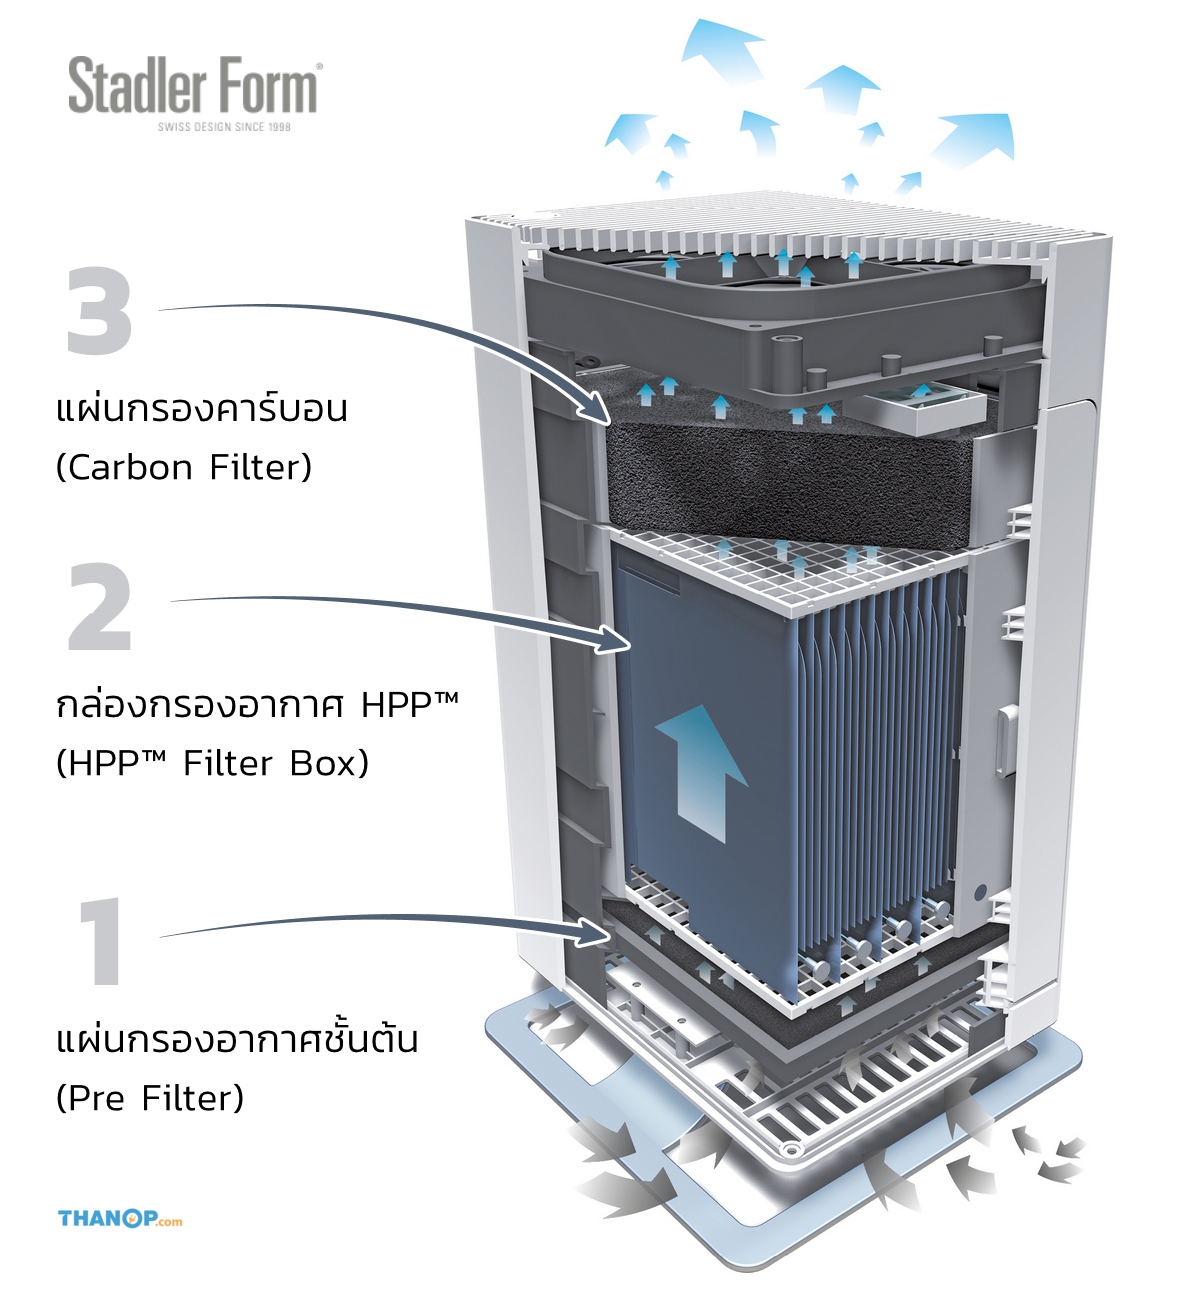 stadler-form-viktor-feature-three-layered-air-filters